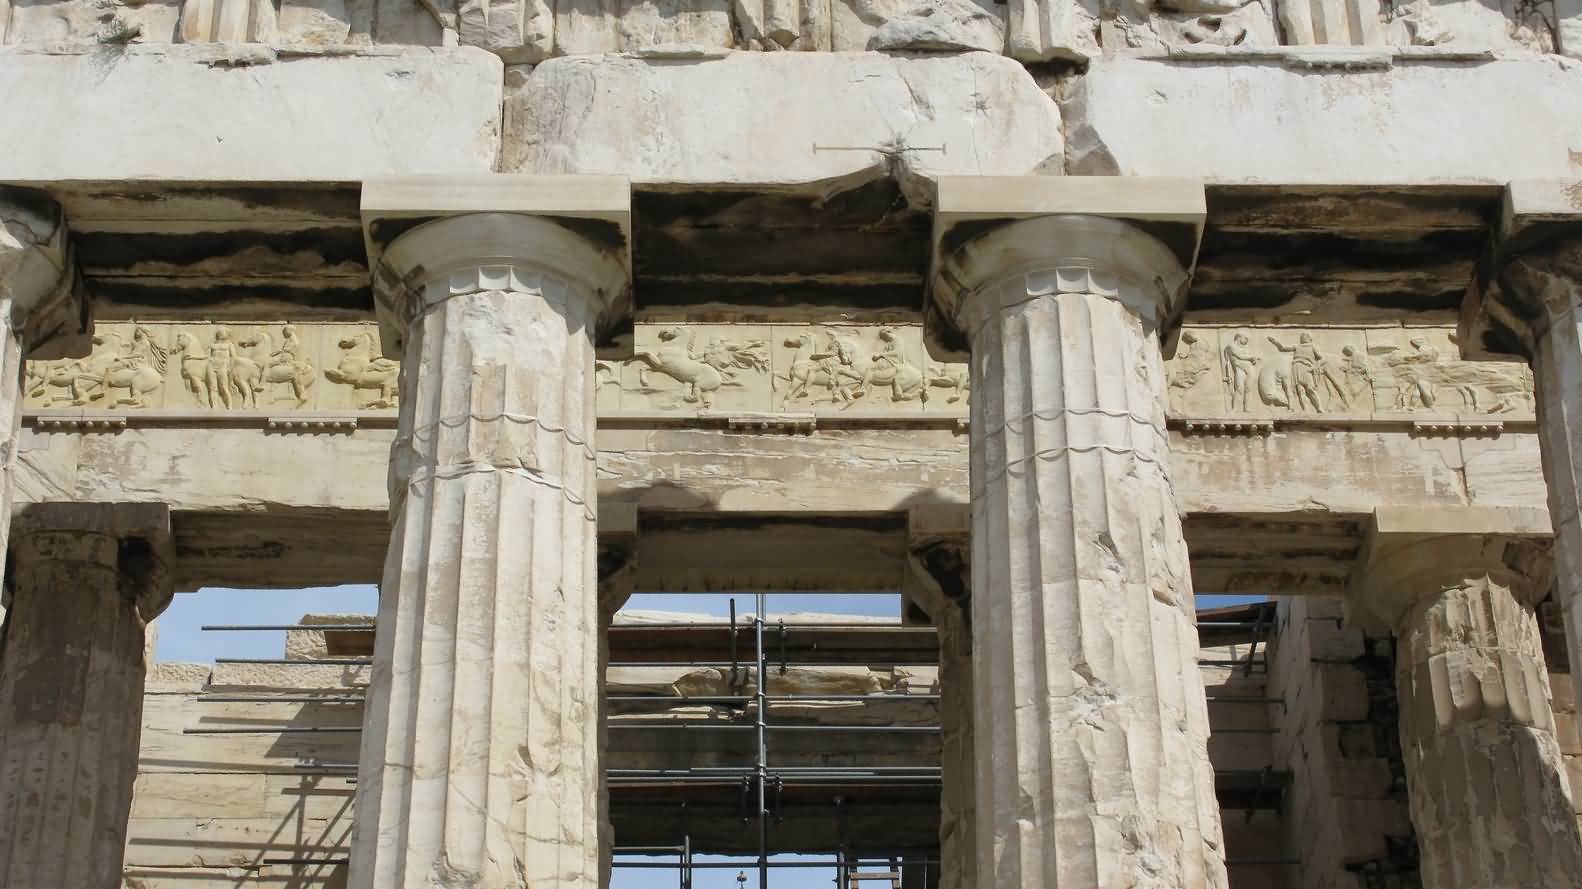 The Details Of The Columns Of Parthenon Temple In Athens, Greece